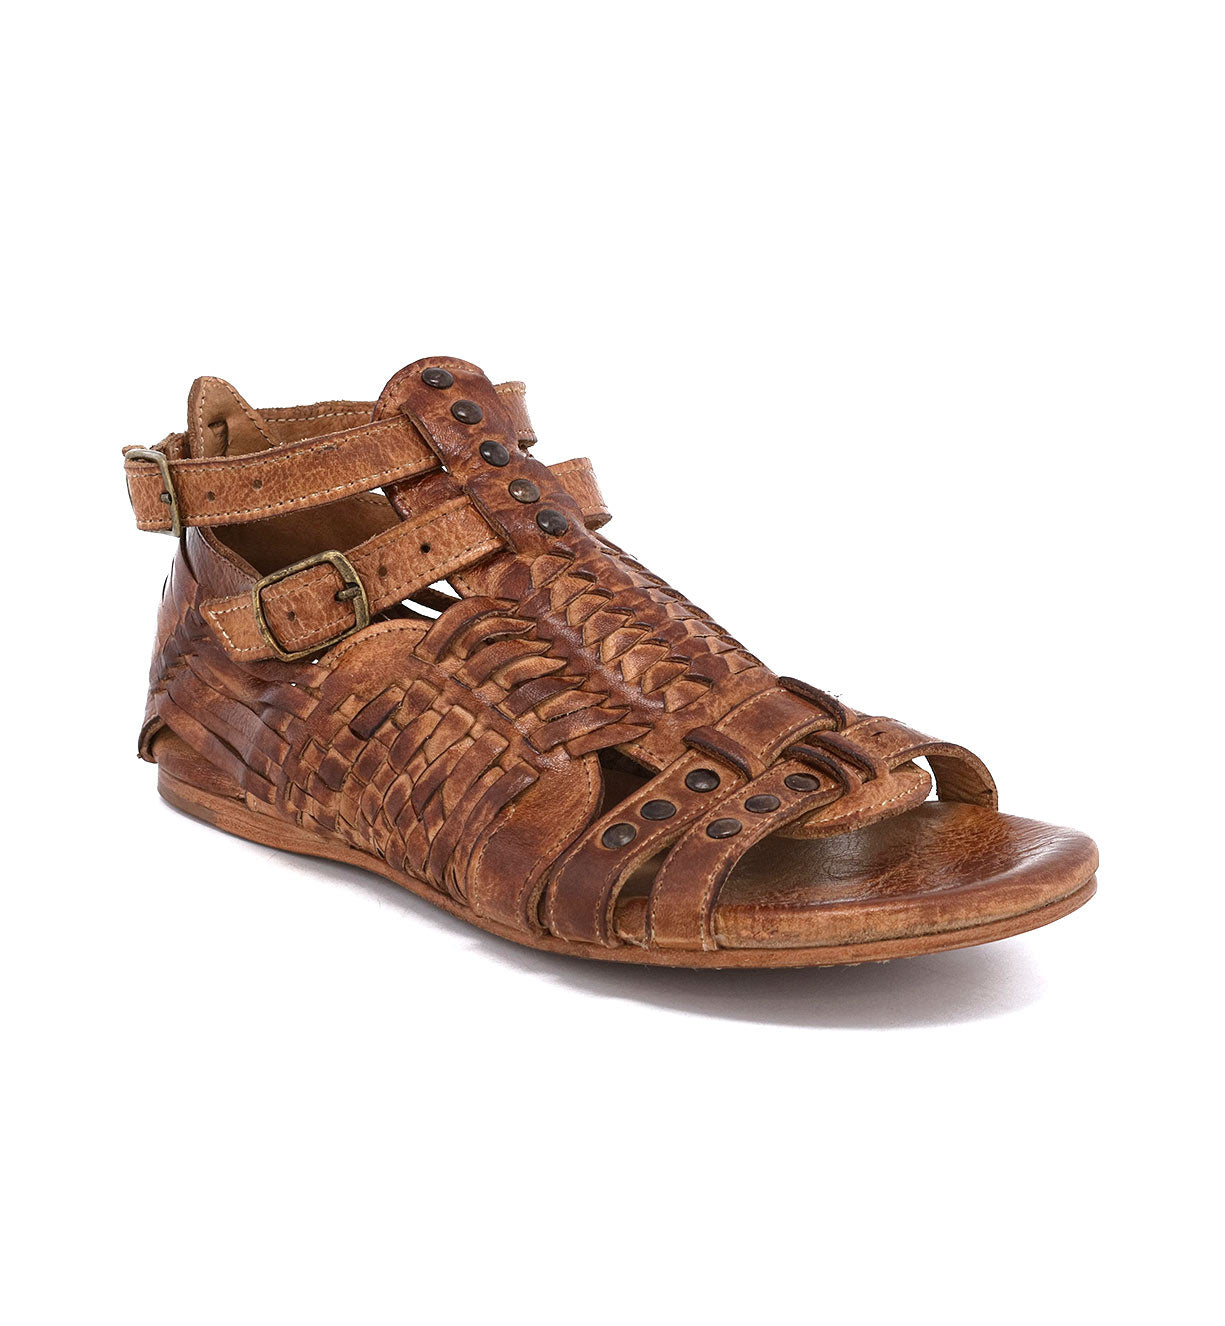 A pair of brown Claire sandals with straps and buckles by Bed Stu.